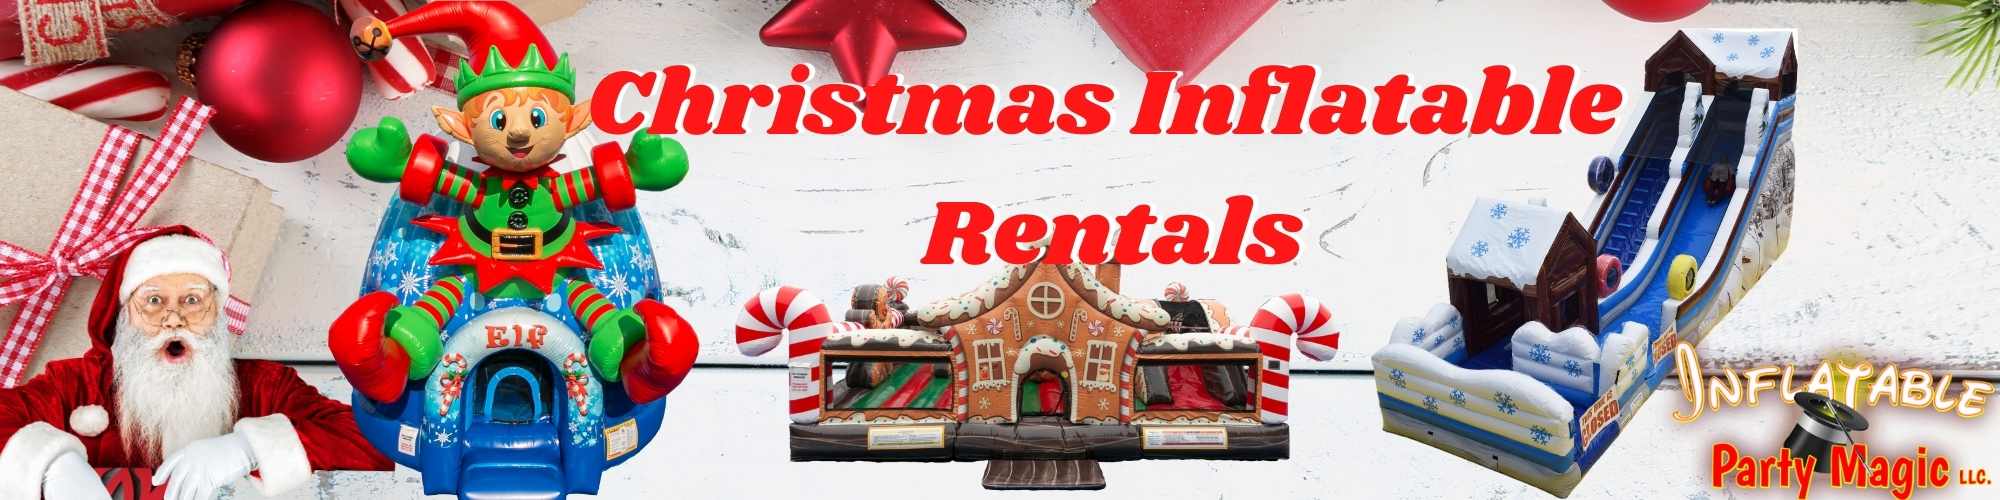 Christmas Inflatable Party Rentals